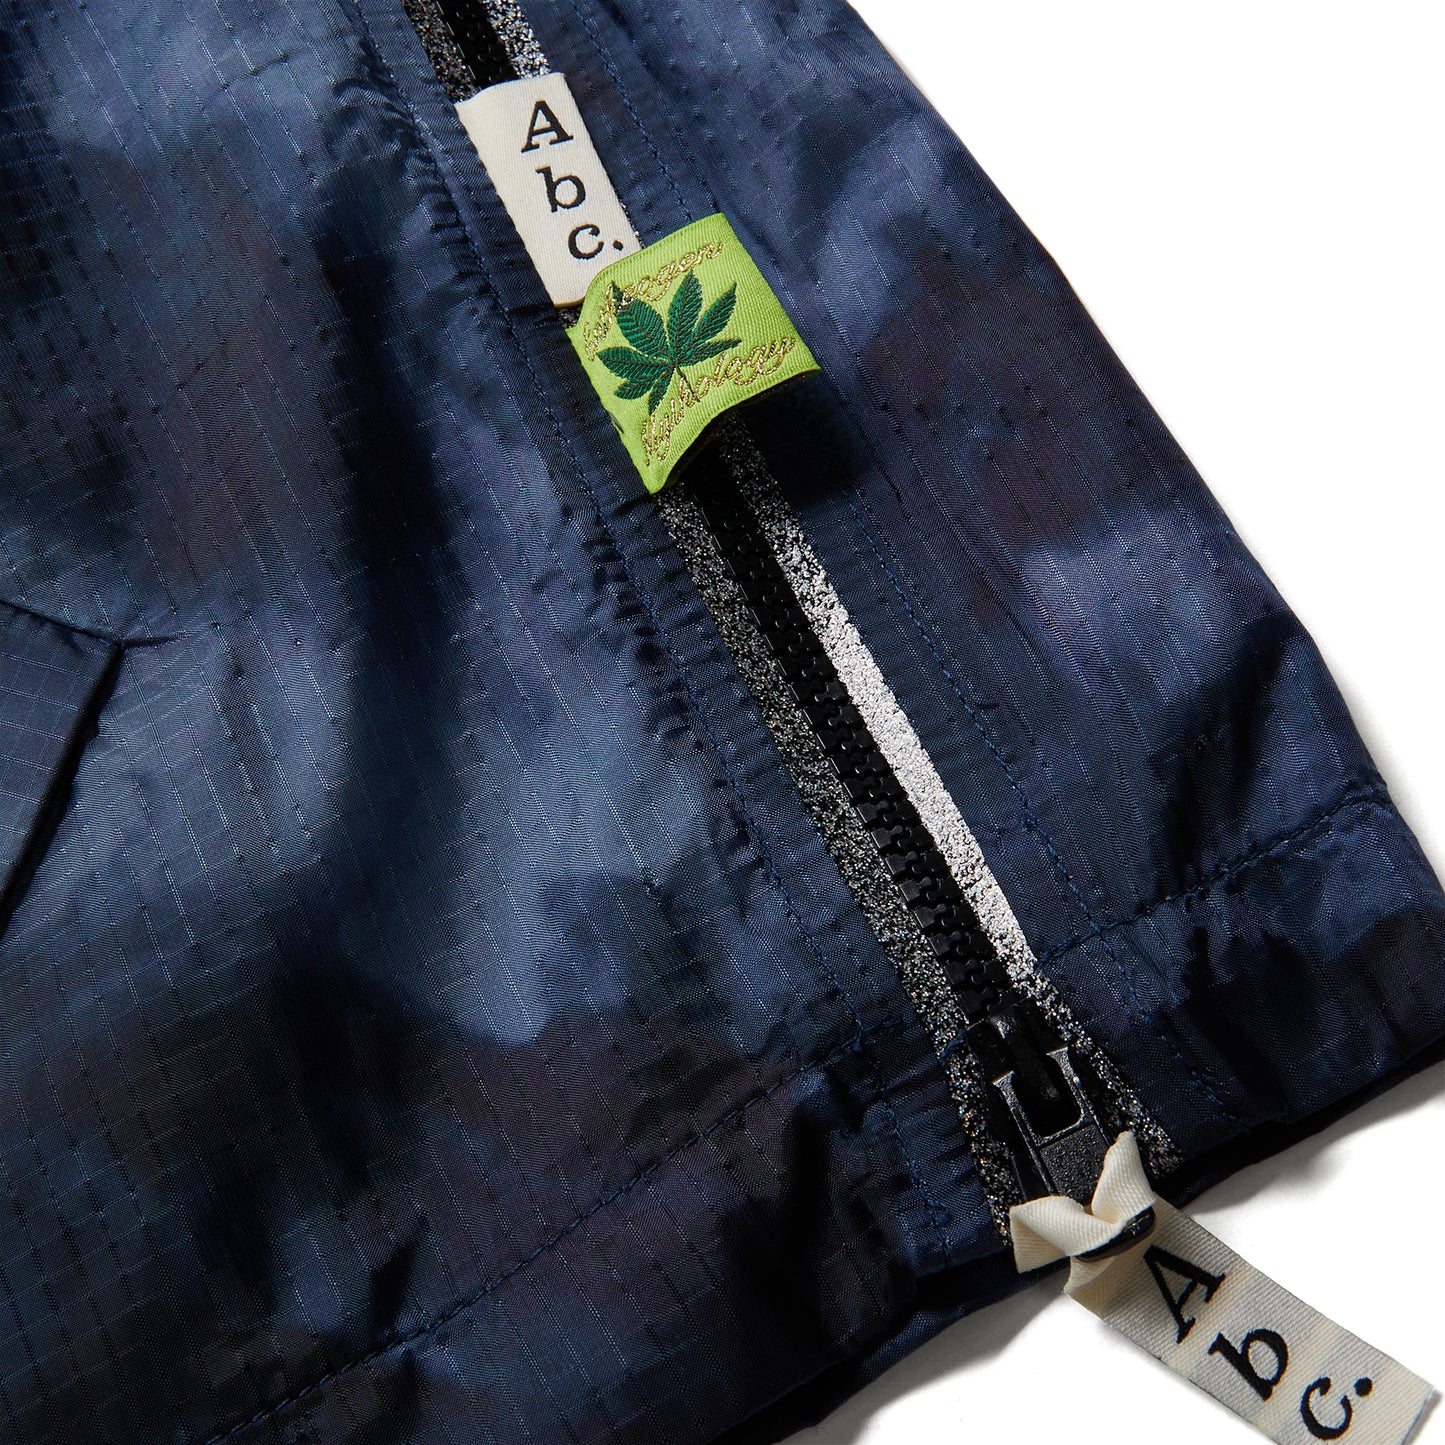 Advisory Board Crystals Abc. Tie-Dyed Ripstop Jacket (Blue)